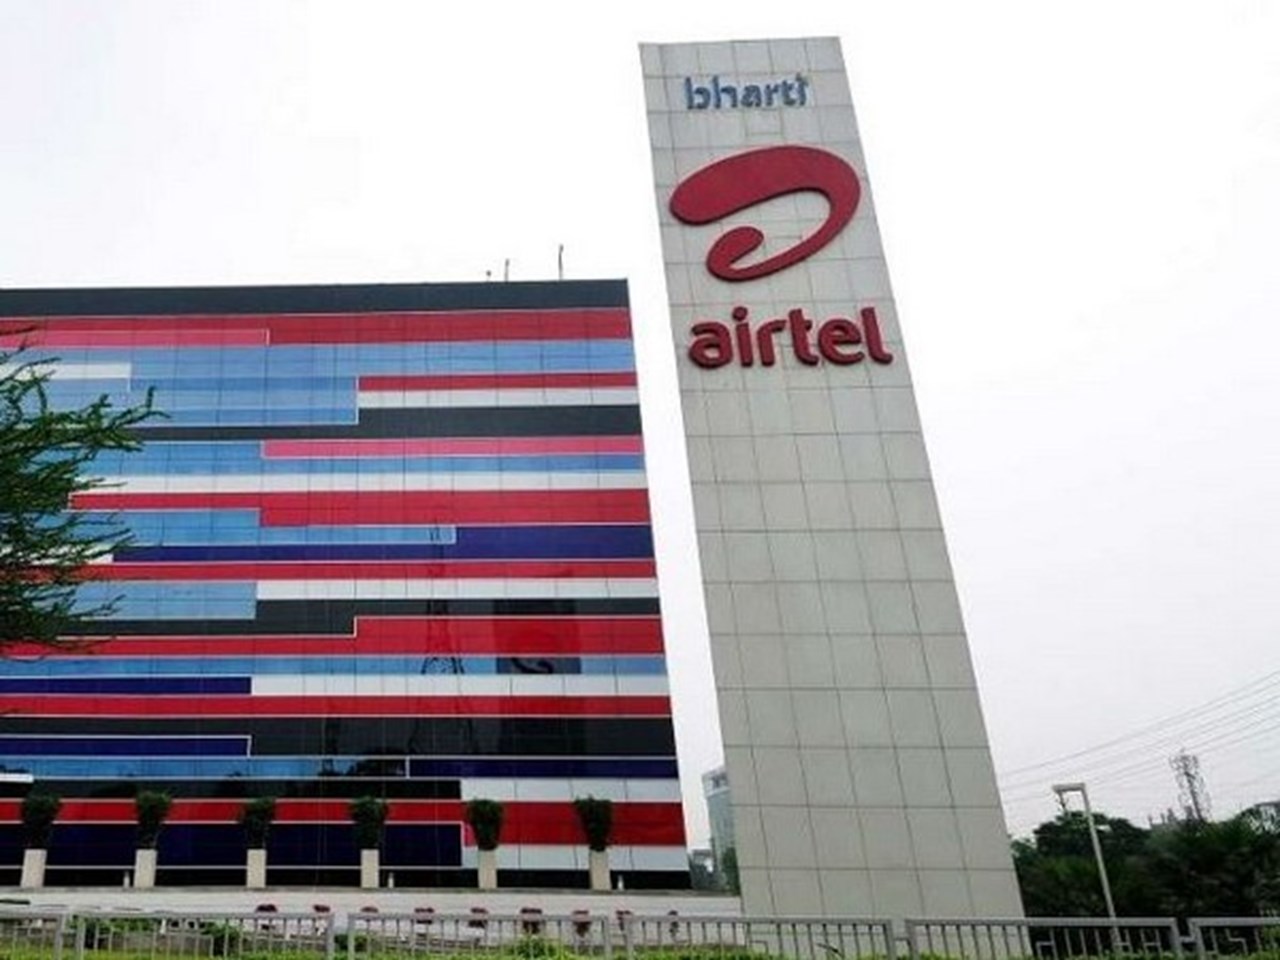 Airtel pre-pays INR 15519 crores to clear all deferred liabilities for spectrum acquired in 2014